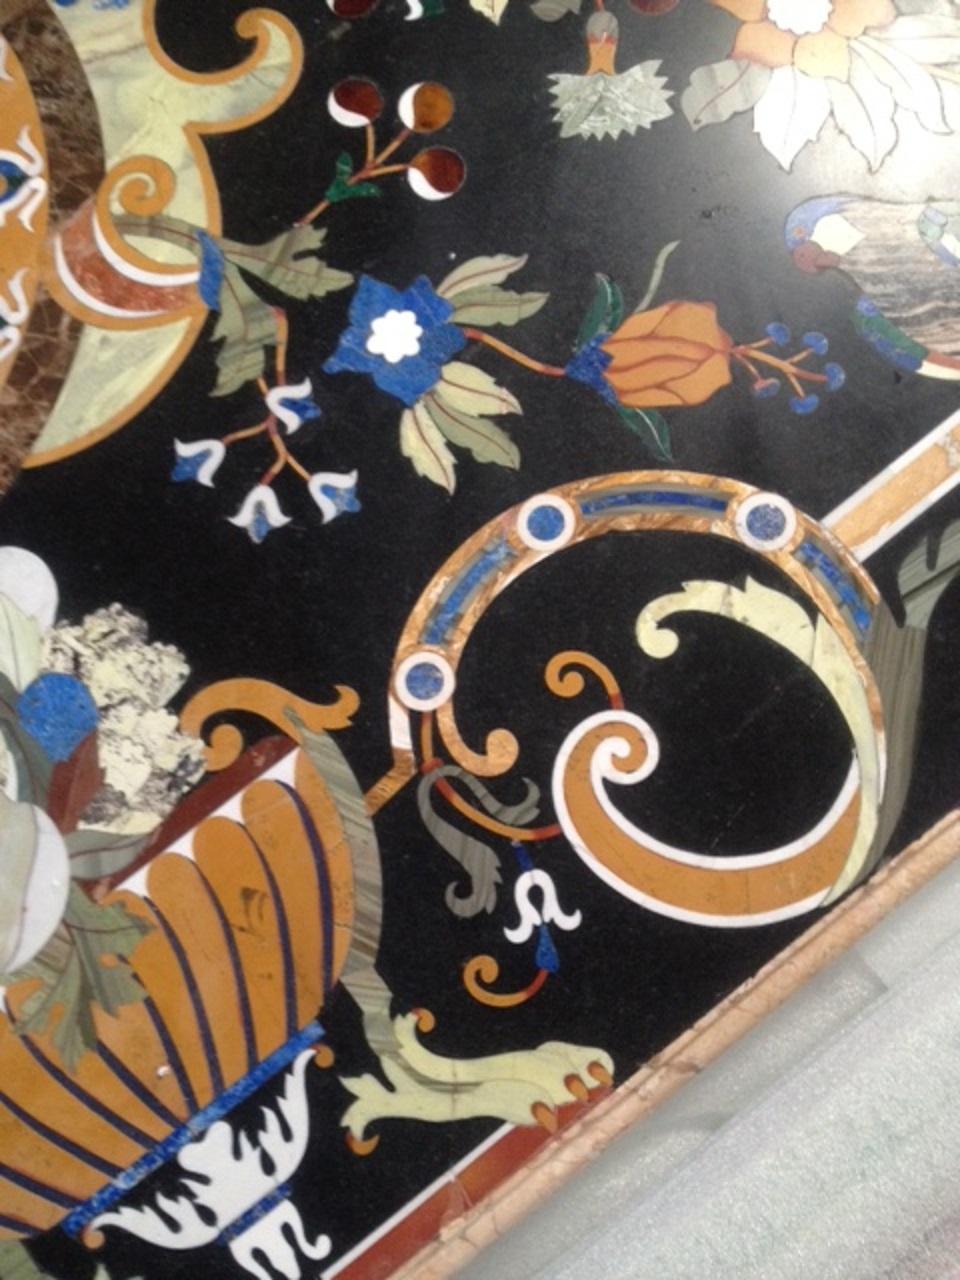 European Rectangular Pietra Dura Table Top, Marble and Hard Stones, It Has a Restoration For Sale